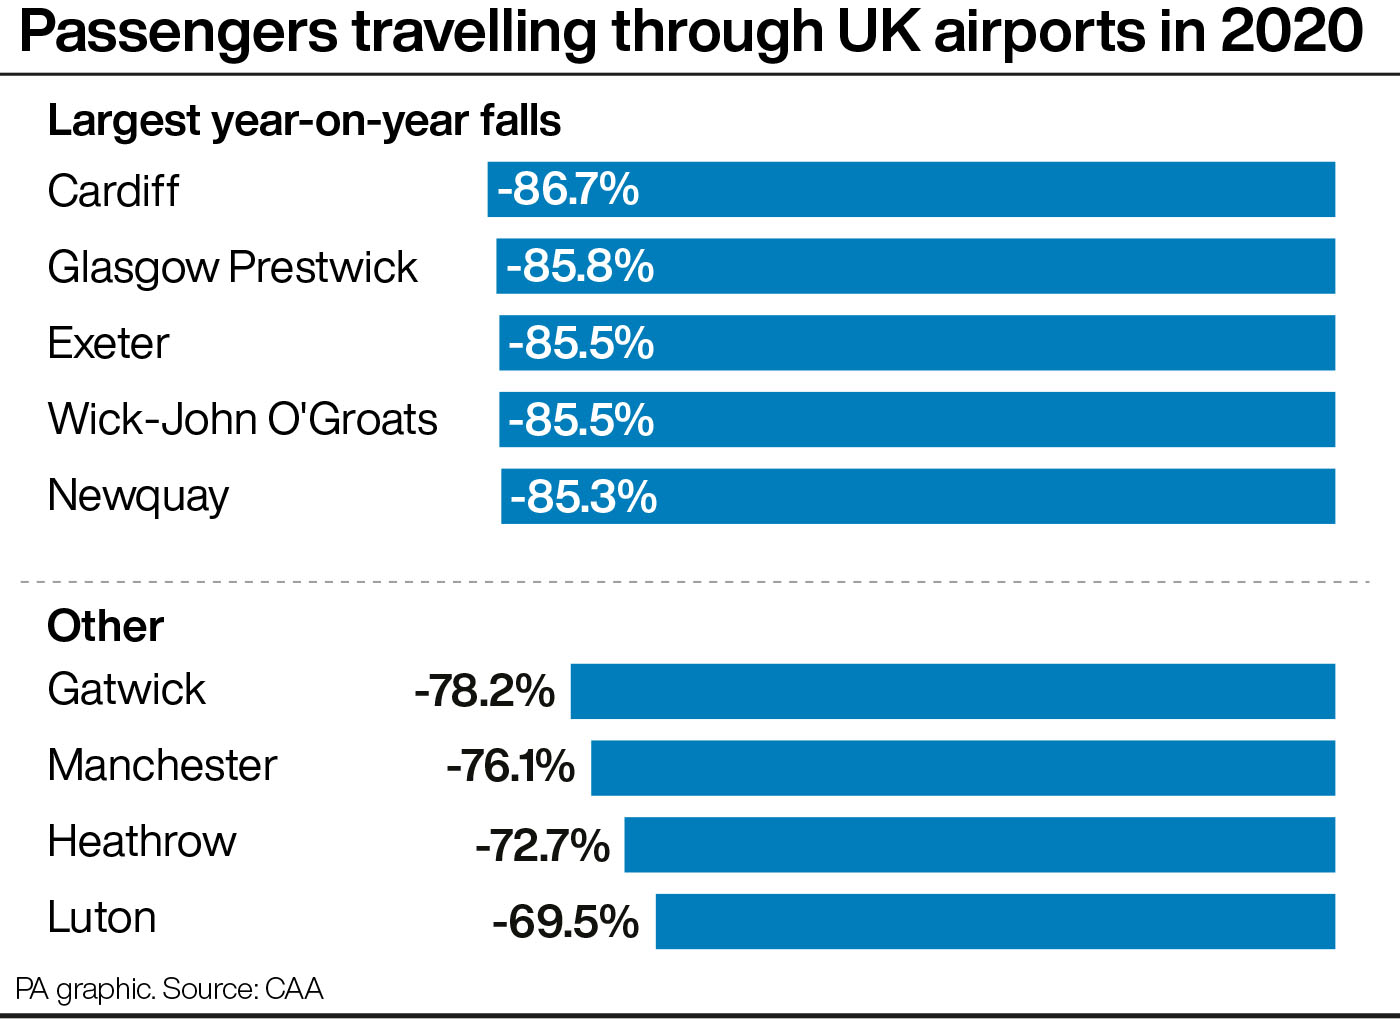 Passengers travelling through UK airports in 2020